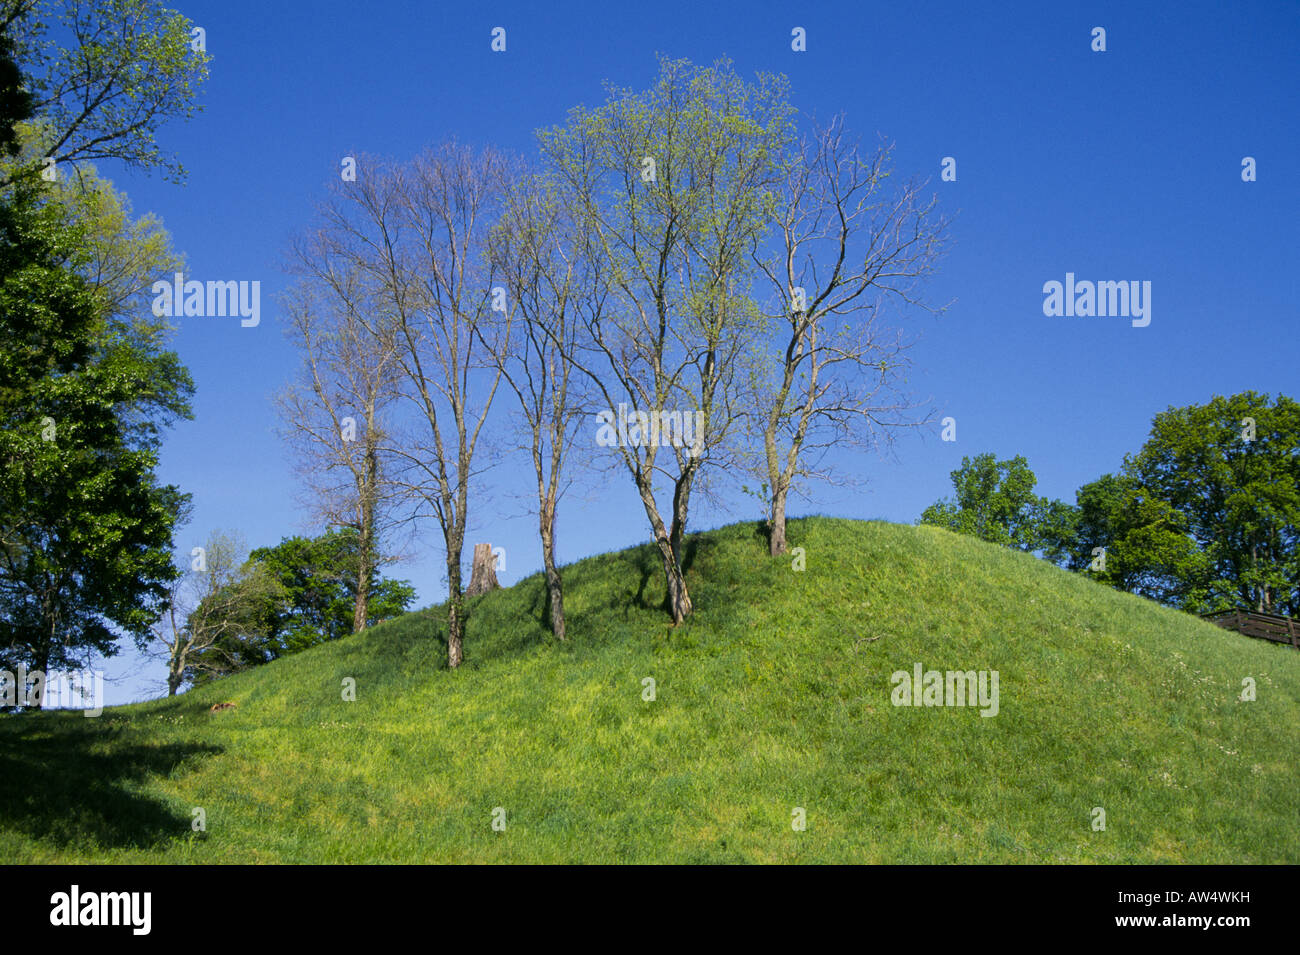 At Etowah Indian Mounds in Georgia, these mounds were built by the Mississippian Culture of native americans Stock Photo